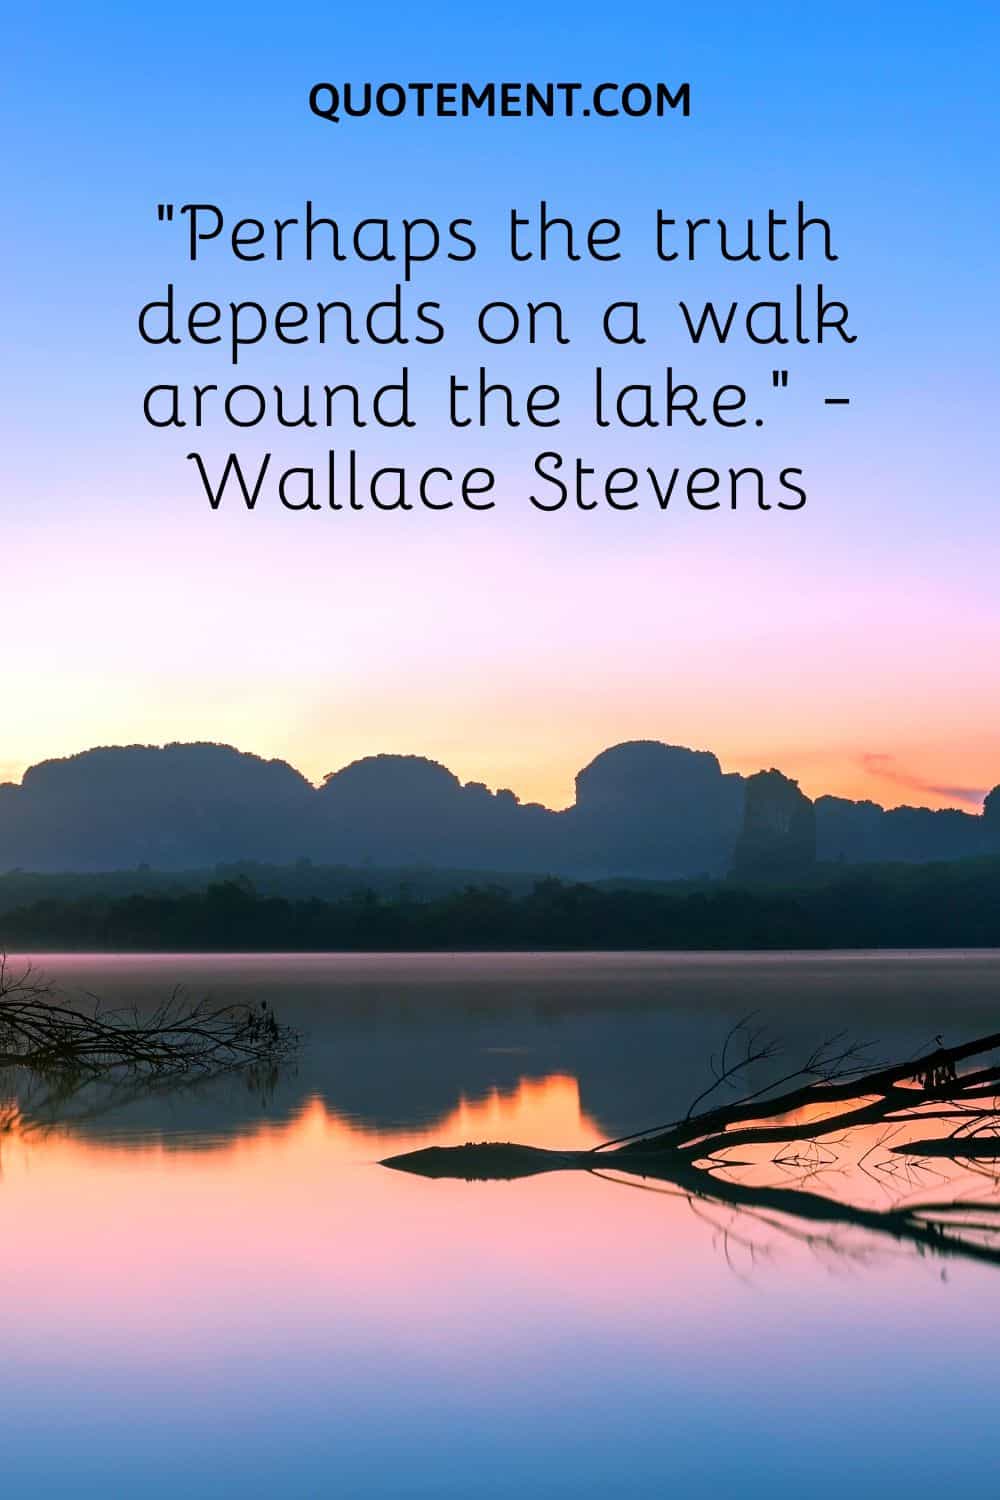 “Perhaps the truth depends on a walk around the lake.” - Wallace Stevens